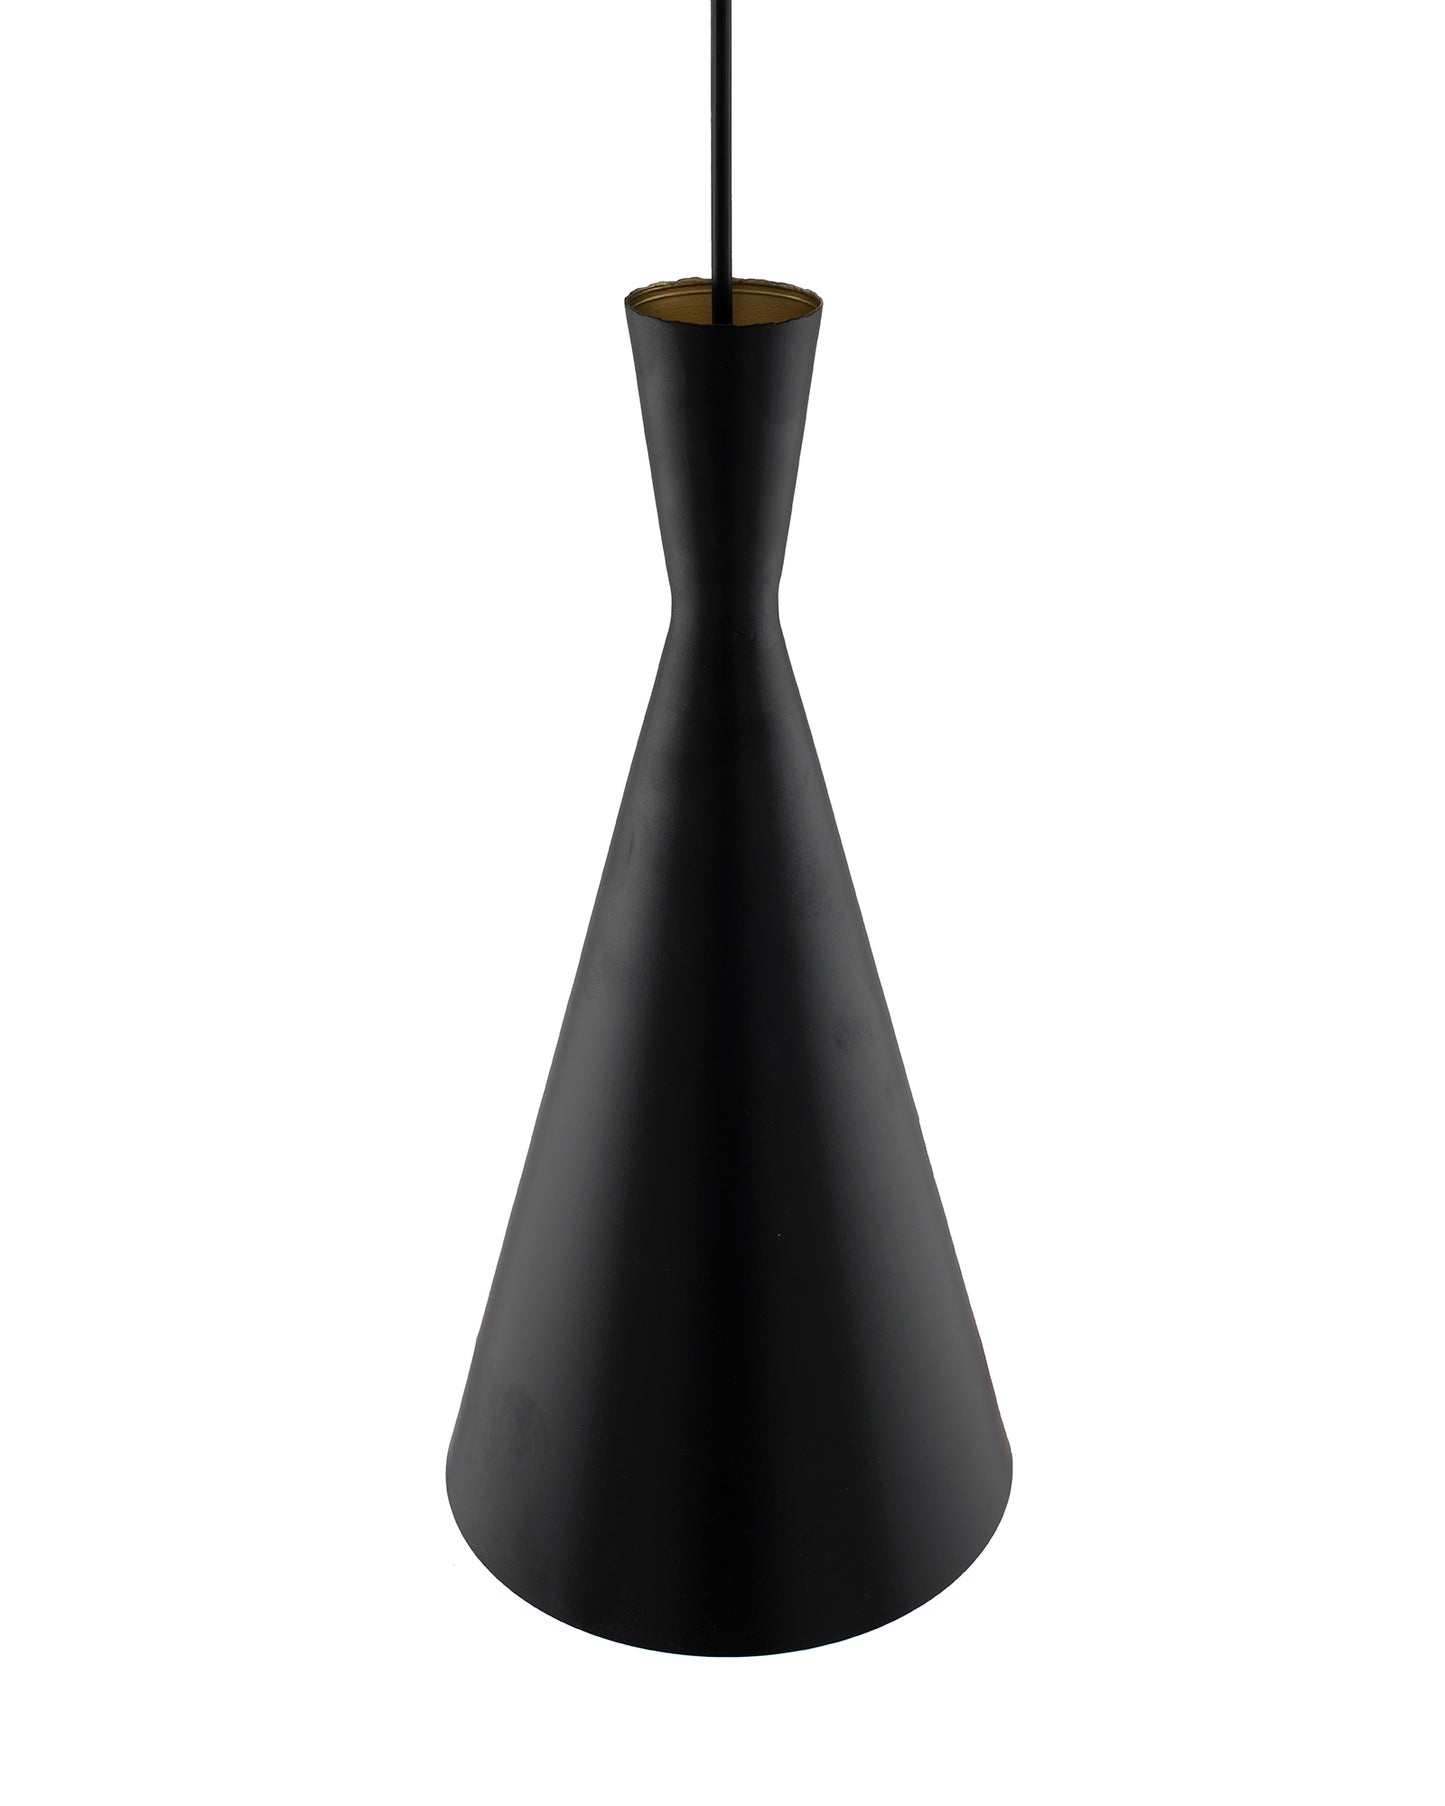 Modern Hanging Light, E26/27 Nordic Pendant Lamp, Inverted Cone Shaped Kitchen, Bedroom, Living Room Ceiling Lamp